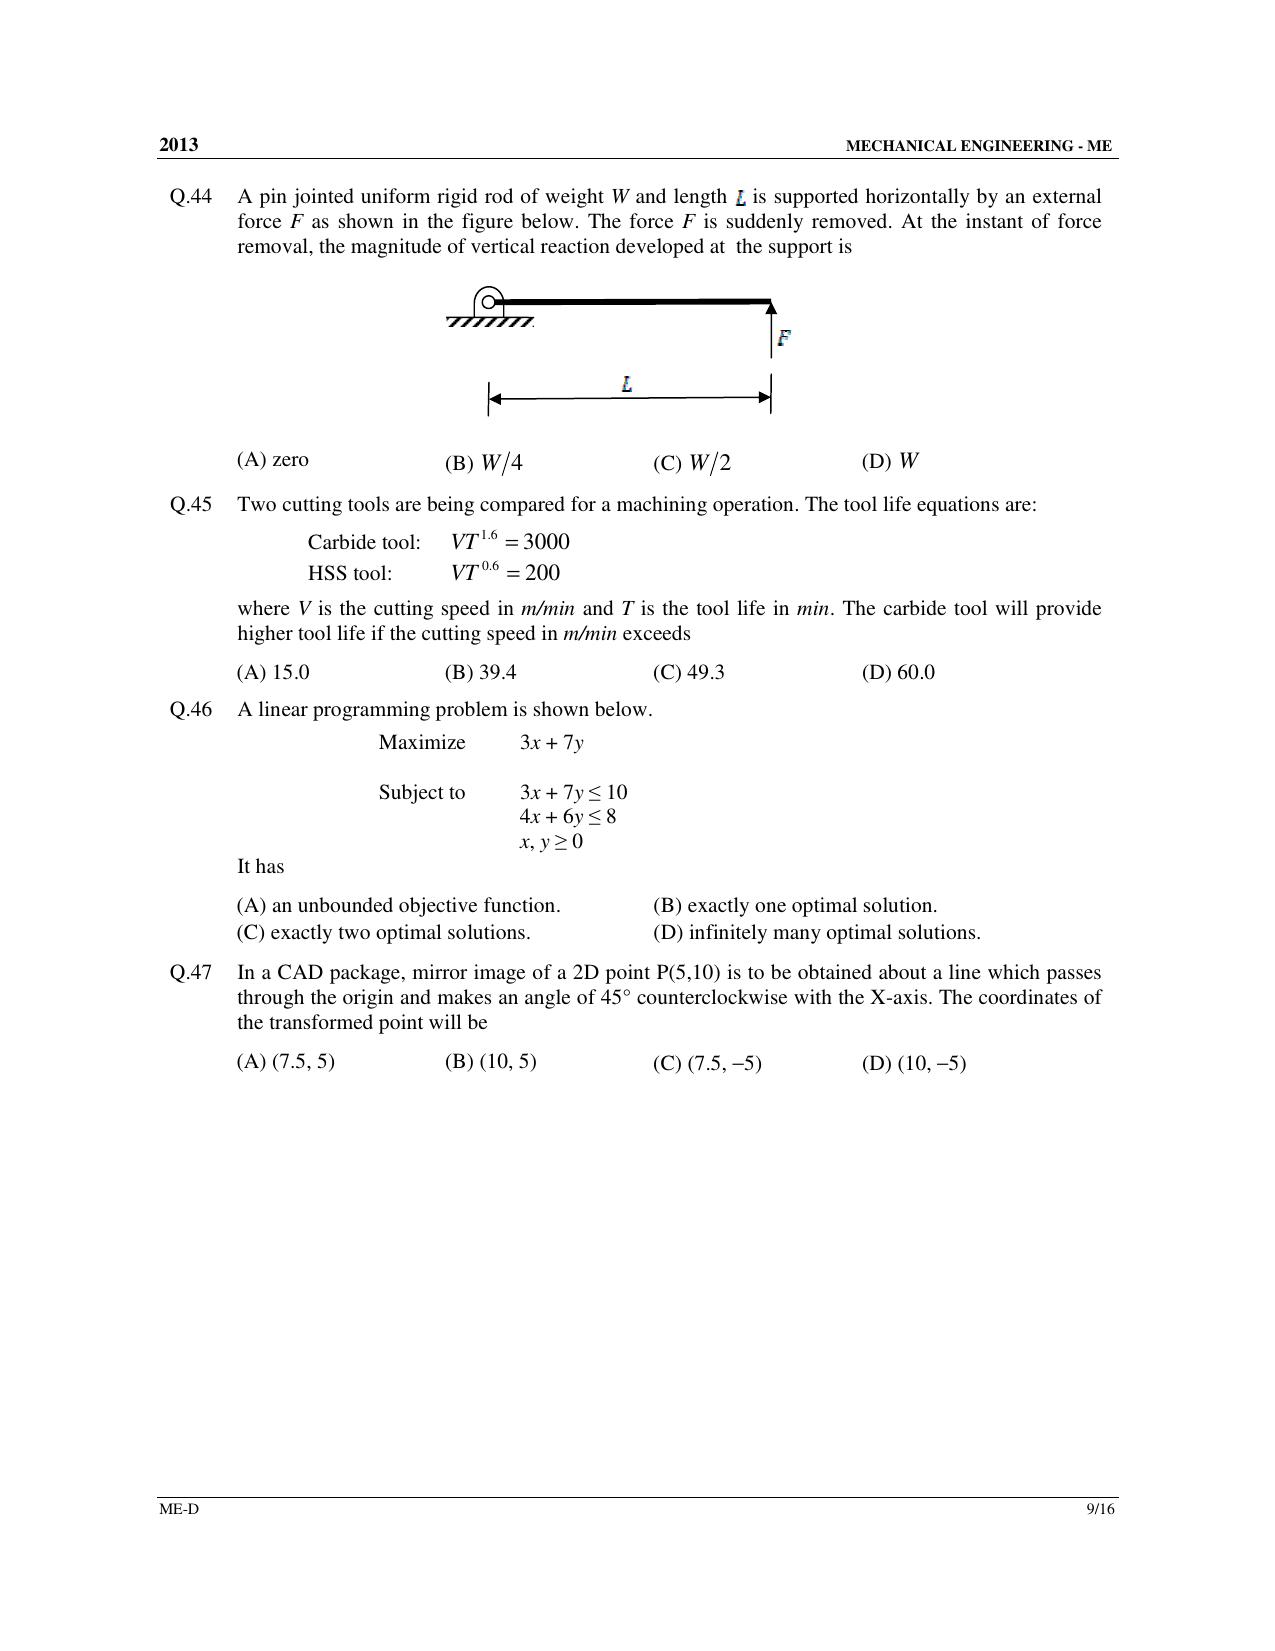 GATE 2013 Mechanical Engineering (ME) Question Paper with Answer Key - Page 52